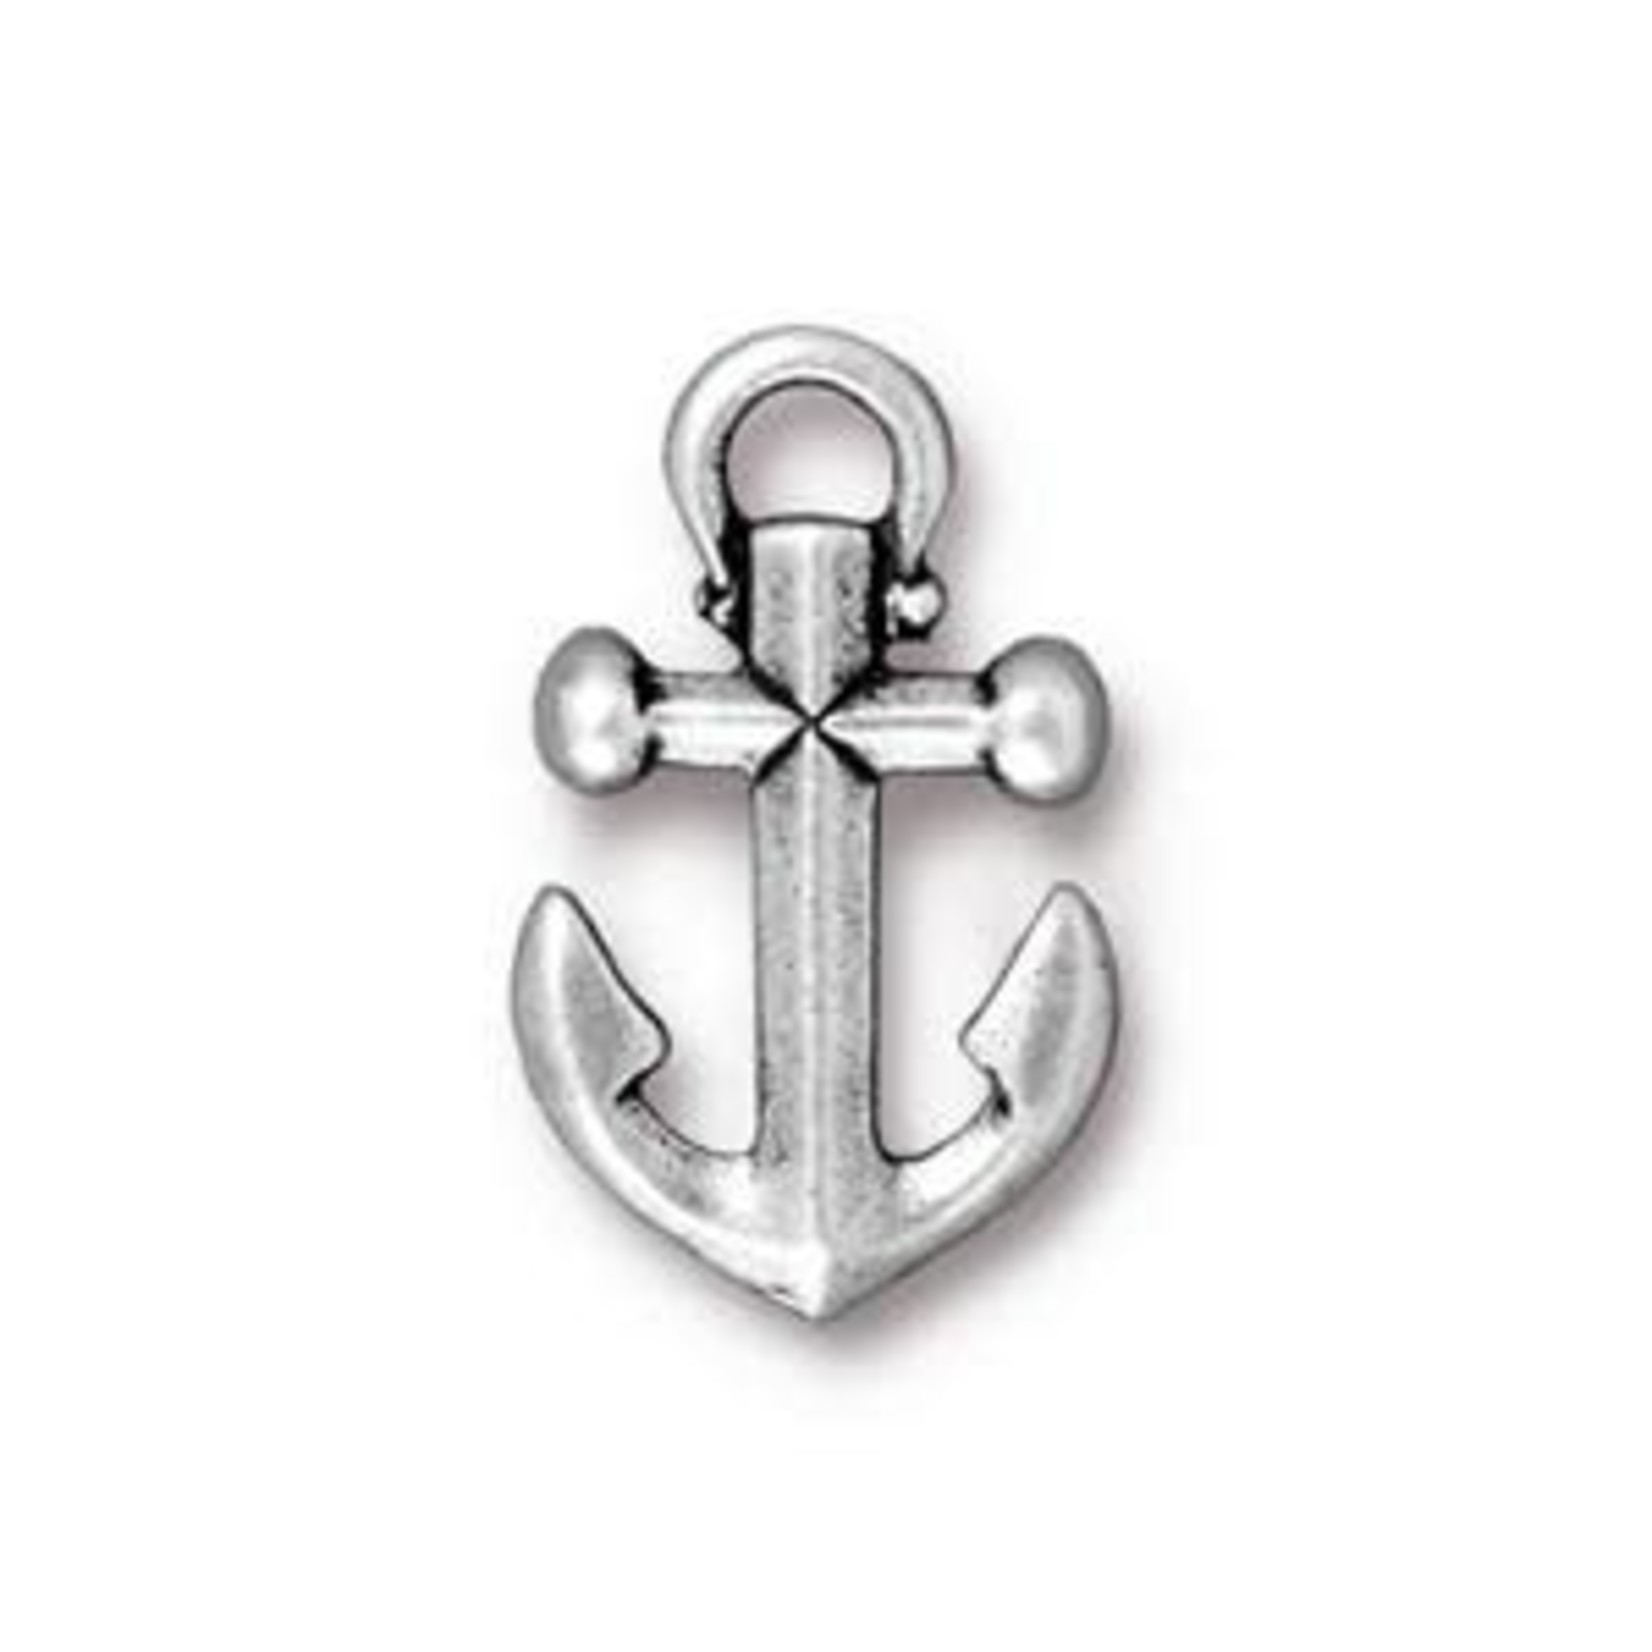 TierraCast Tierracast Antique SIlver Plated Anchor Charm